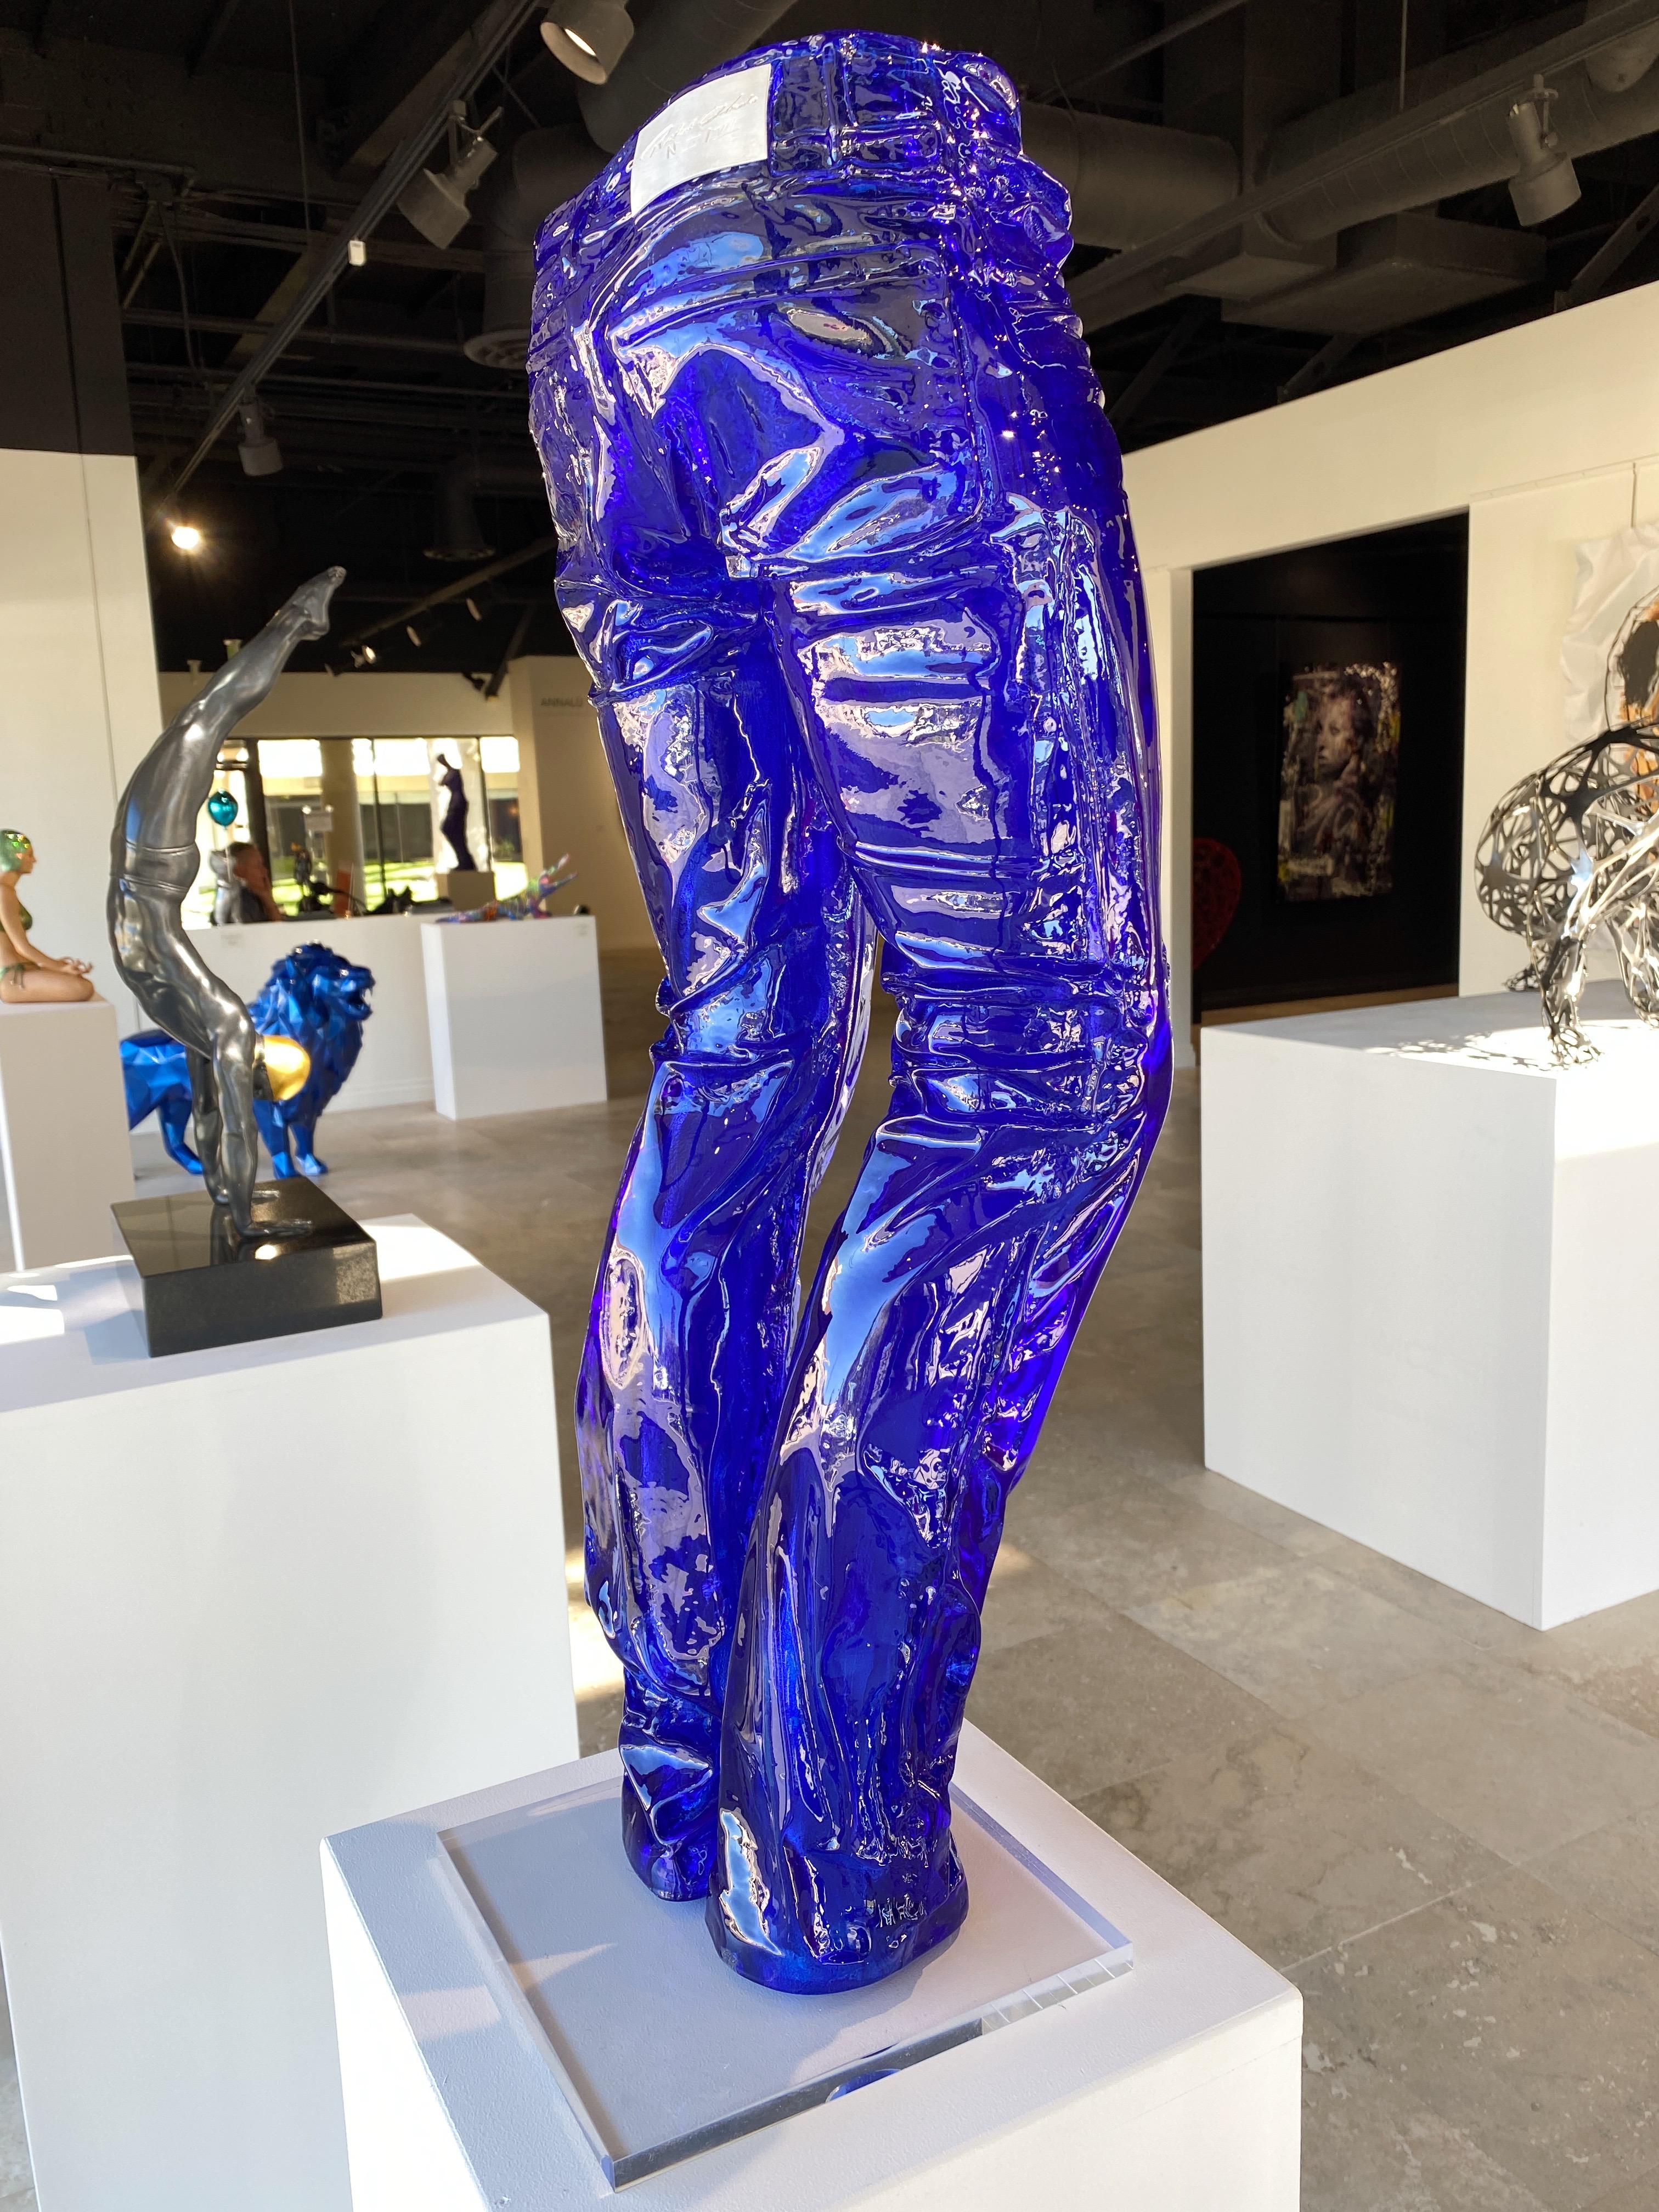 Artist: Richard Orlinski, French
Title: Crystal Clear Blue Jeans
Edition 1 of 8
Media: Epoxy resin
Dimensions: 10.5 x 27.5 x 9 in. / 27 x 70 x 23 cm
- -

About the artist:

Richard Orlinski sculpts to sublimate reality and create living, beautiful